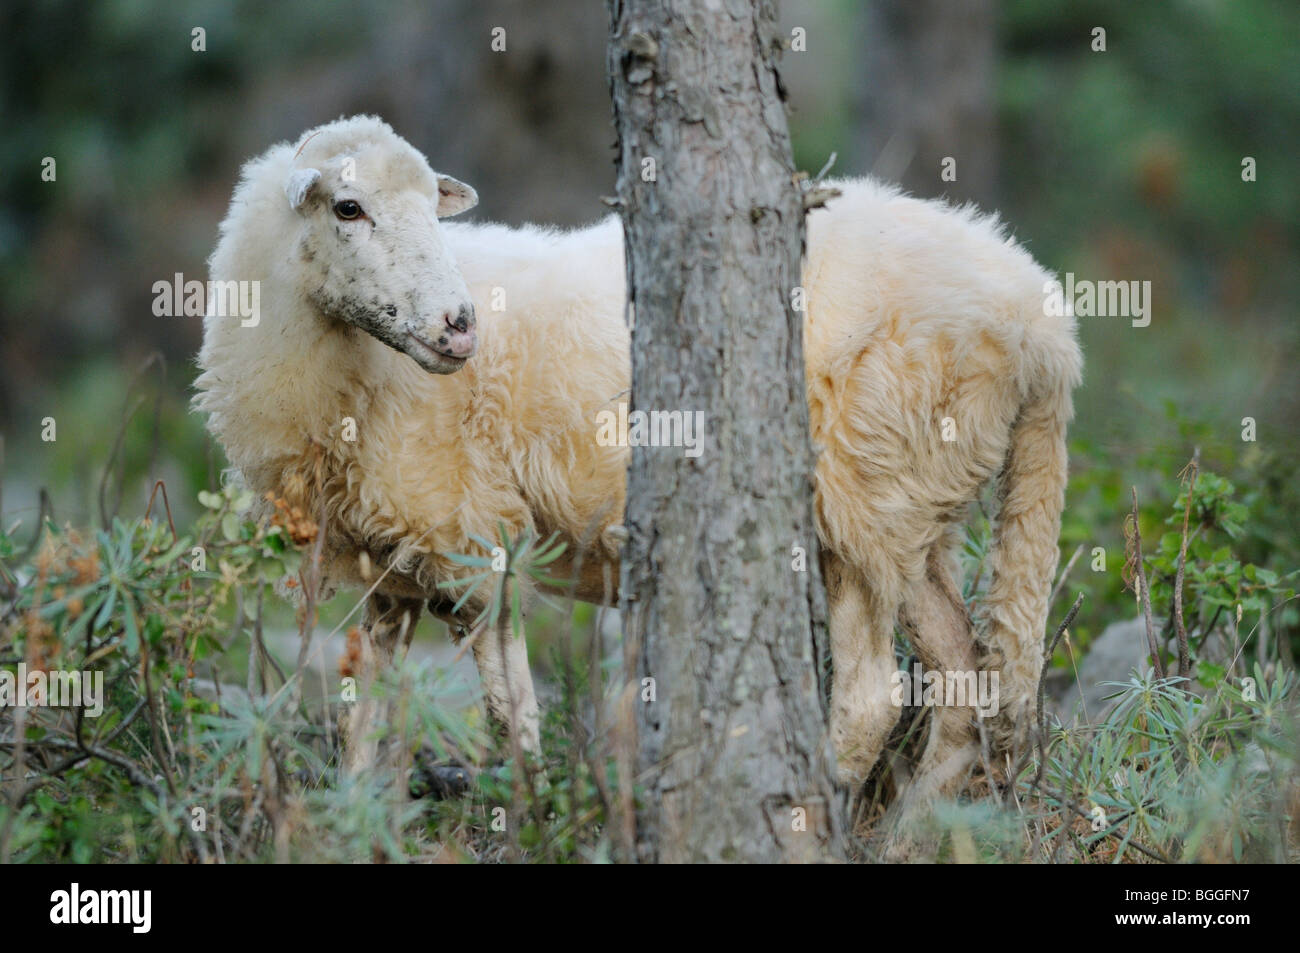 Sheep (Ovis aries) standing behind a tree trunk Stock Photo